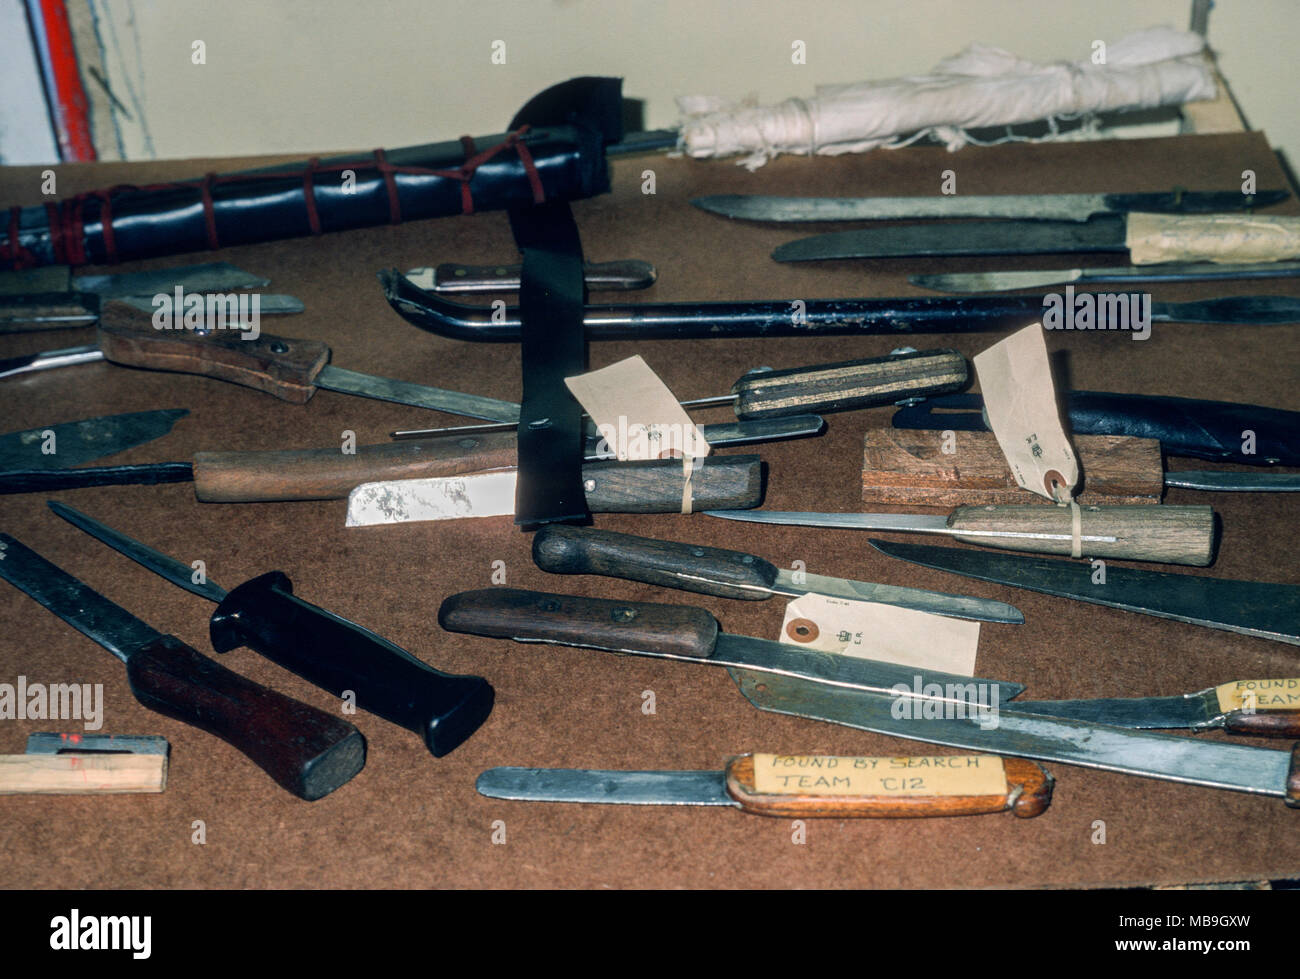 Improvised weapons found in the Maze Prison County Down Northern Ireland formely Long Kesh Detention Centre H blocks 1981 Stock Photo